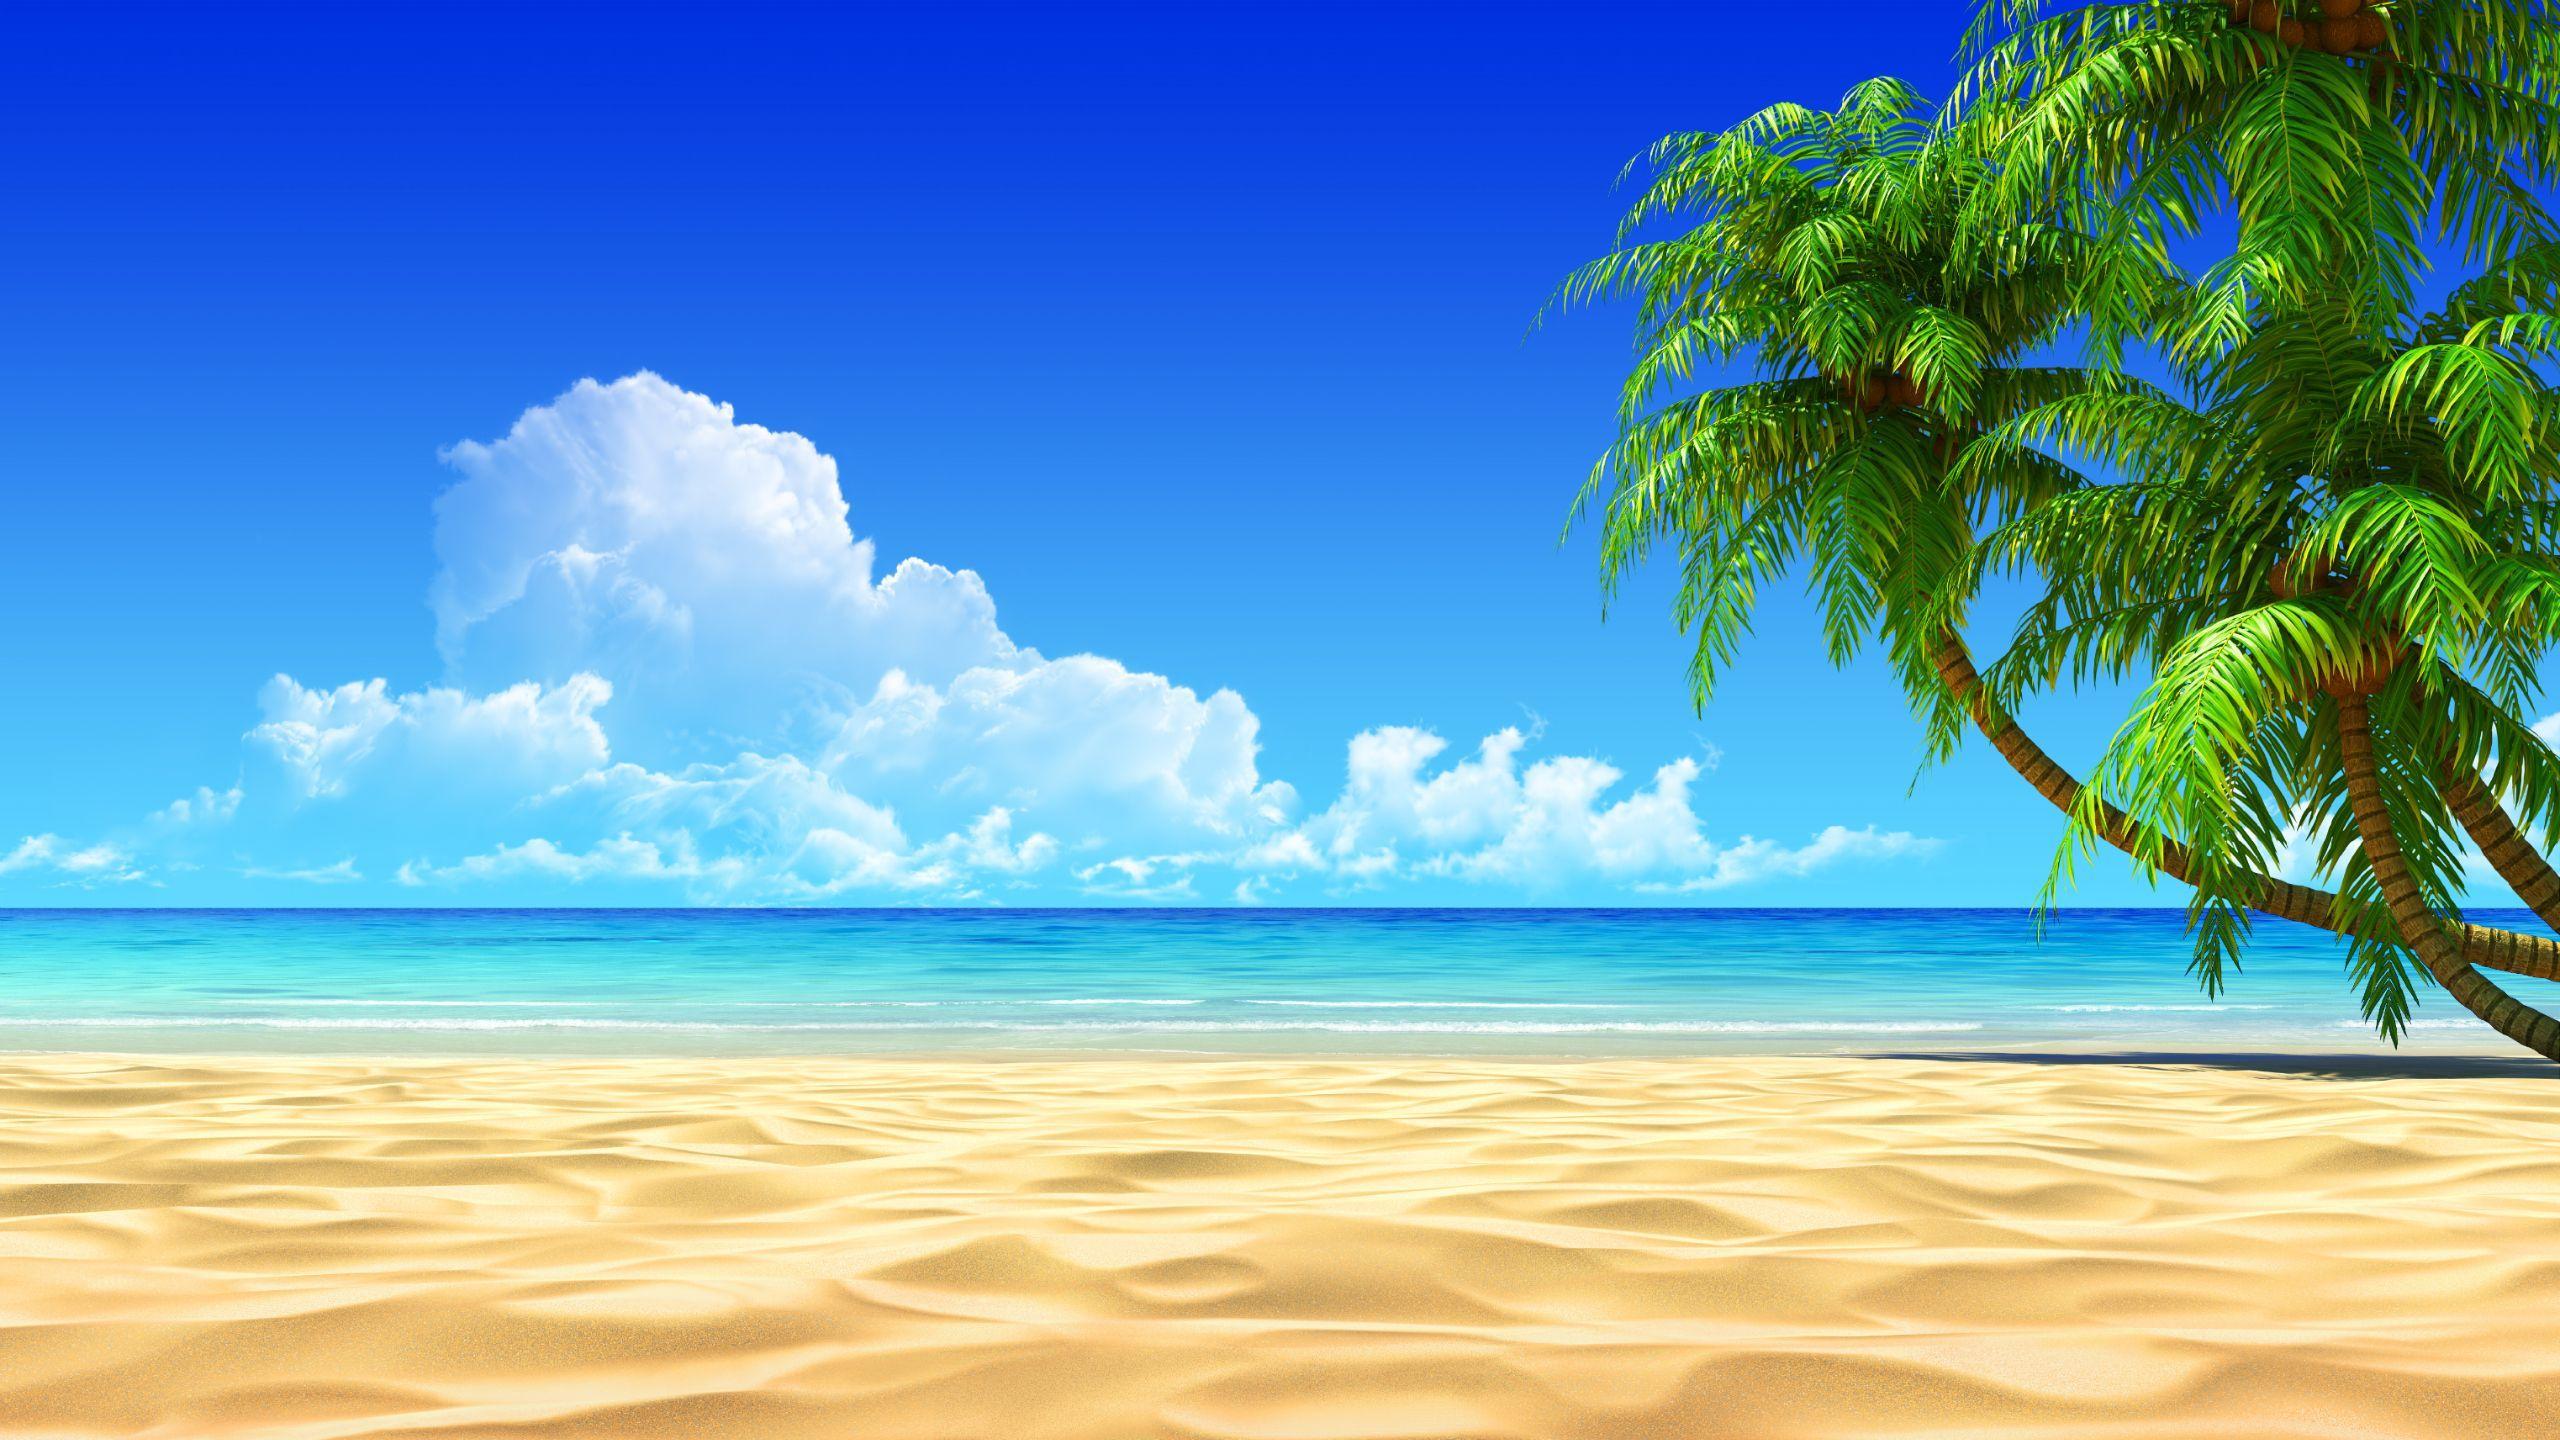 Image for Tropical Beaches With Palm Trees Wallpaper Desktop